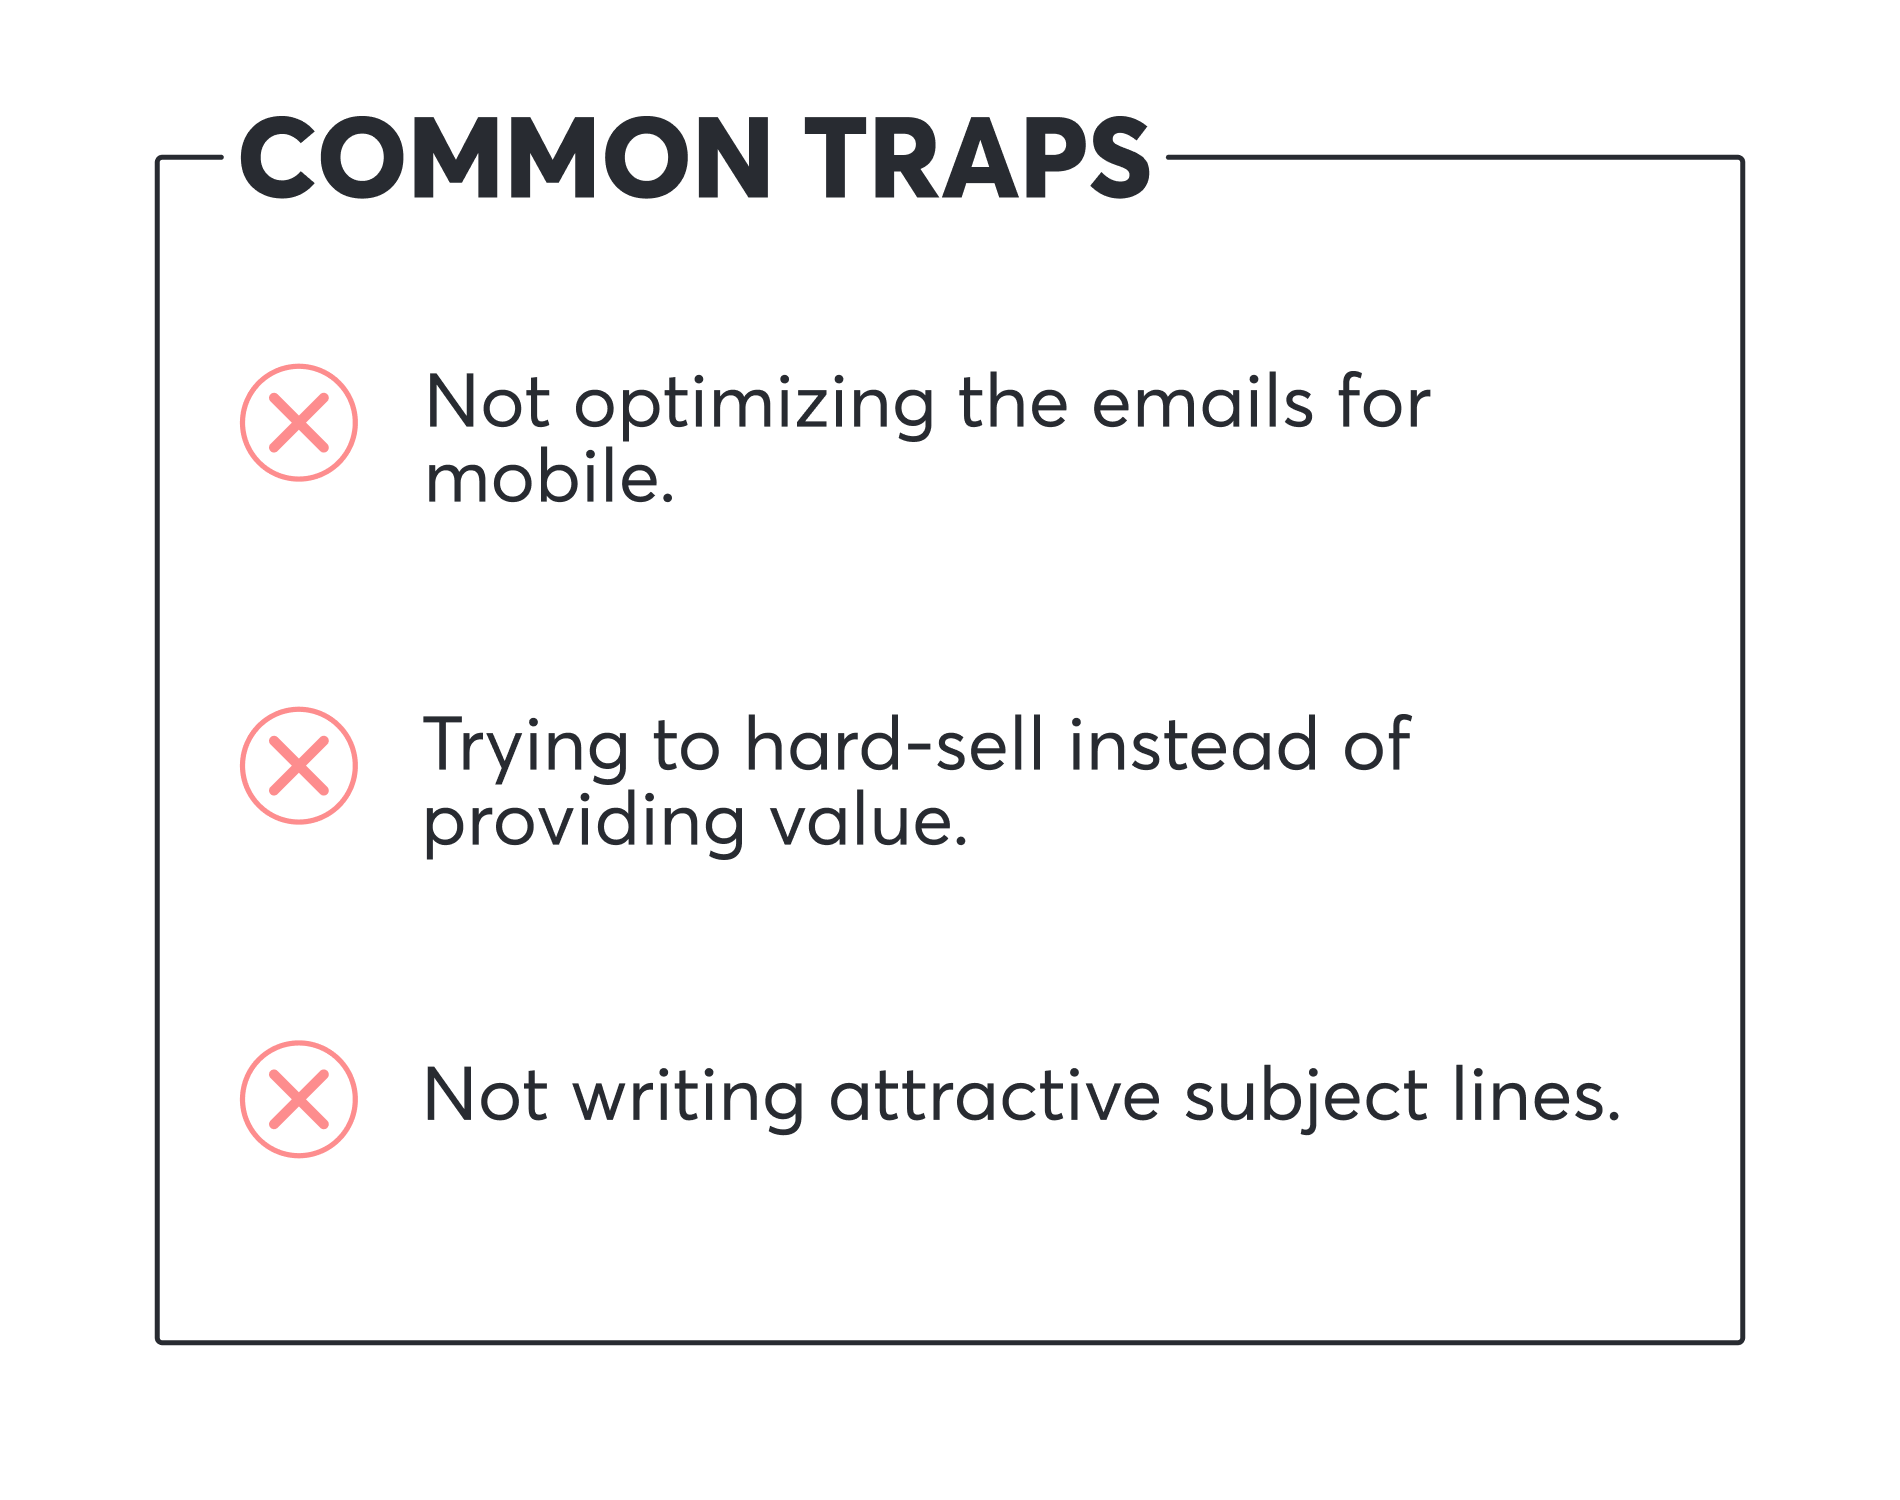 Common Traps to Leverage eMail Marketing